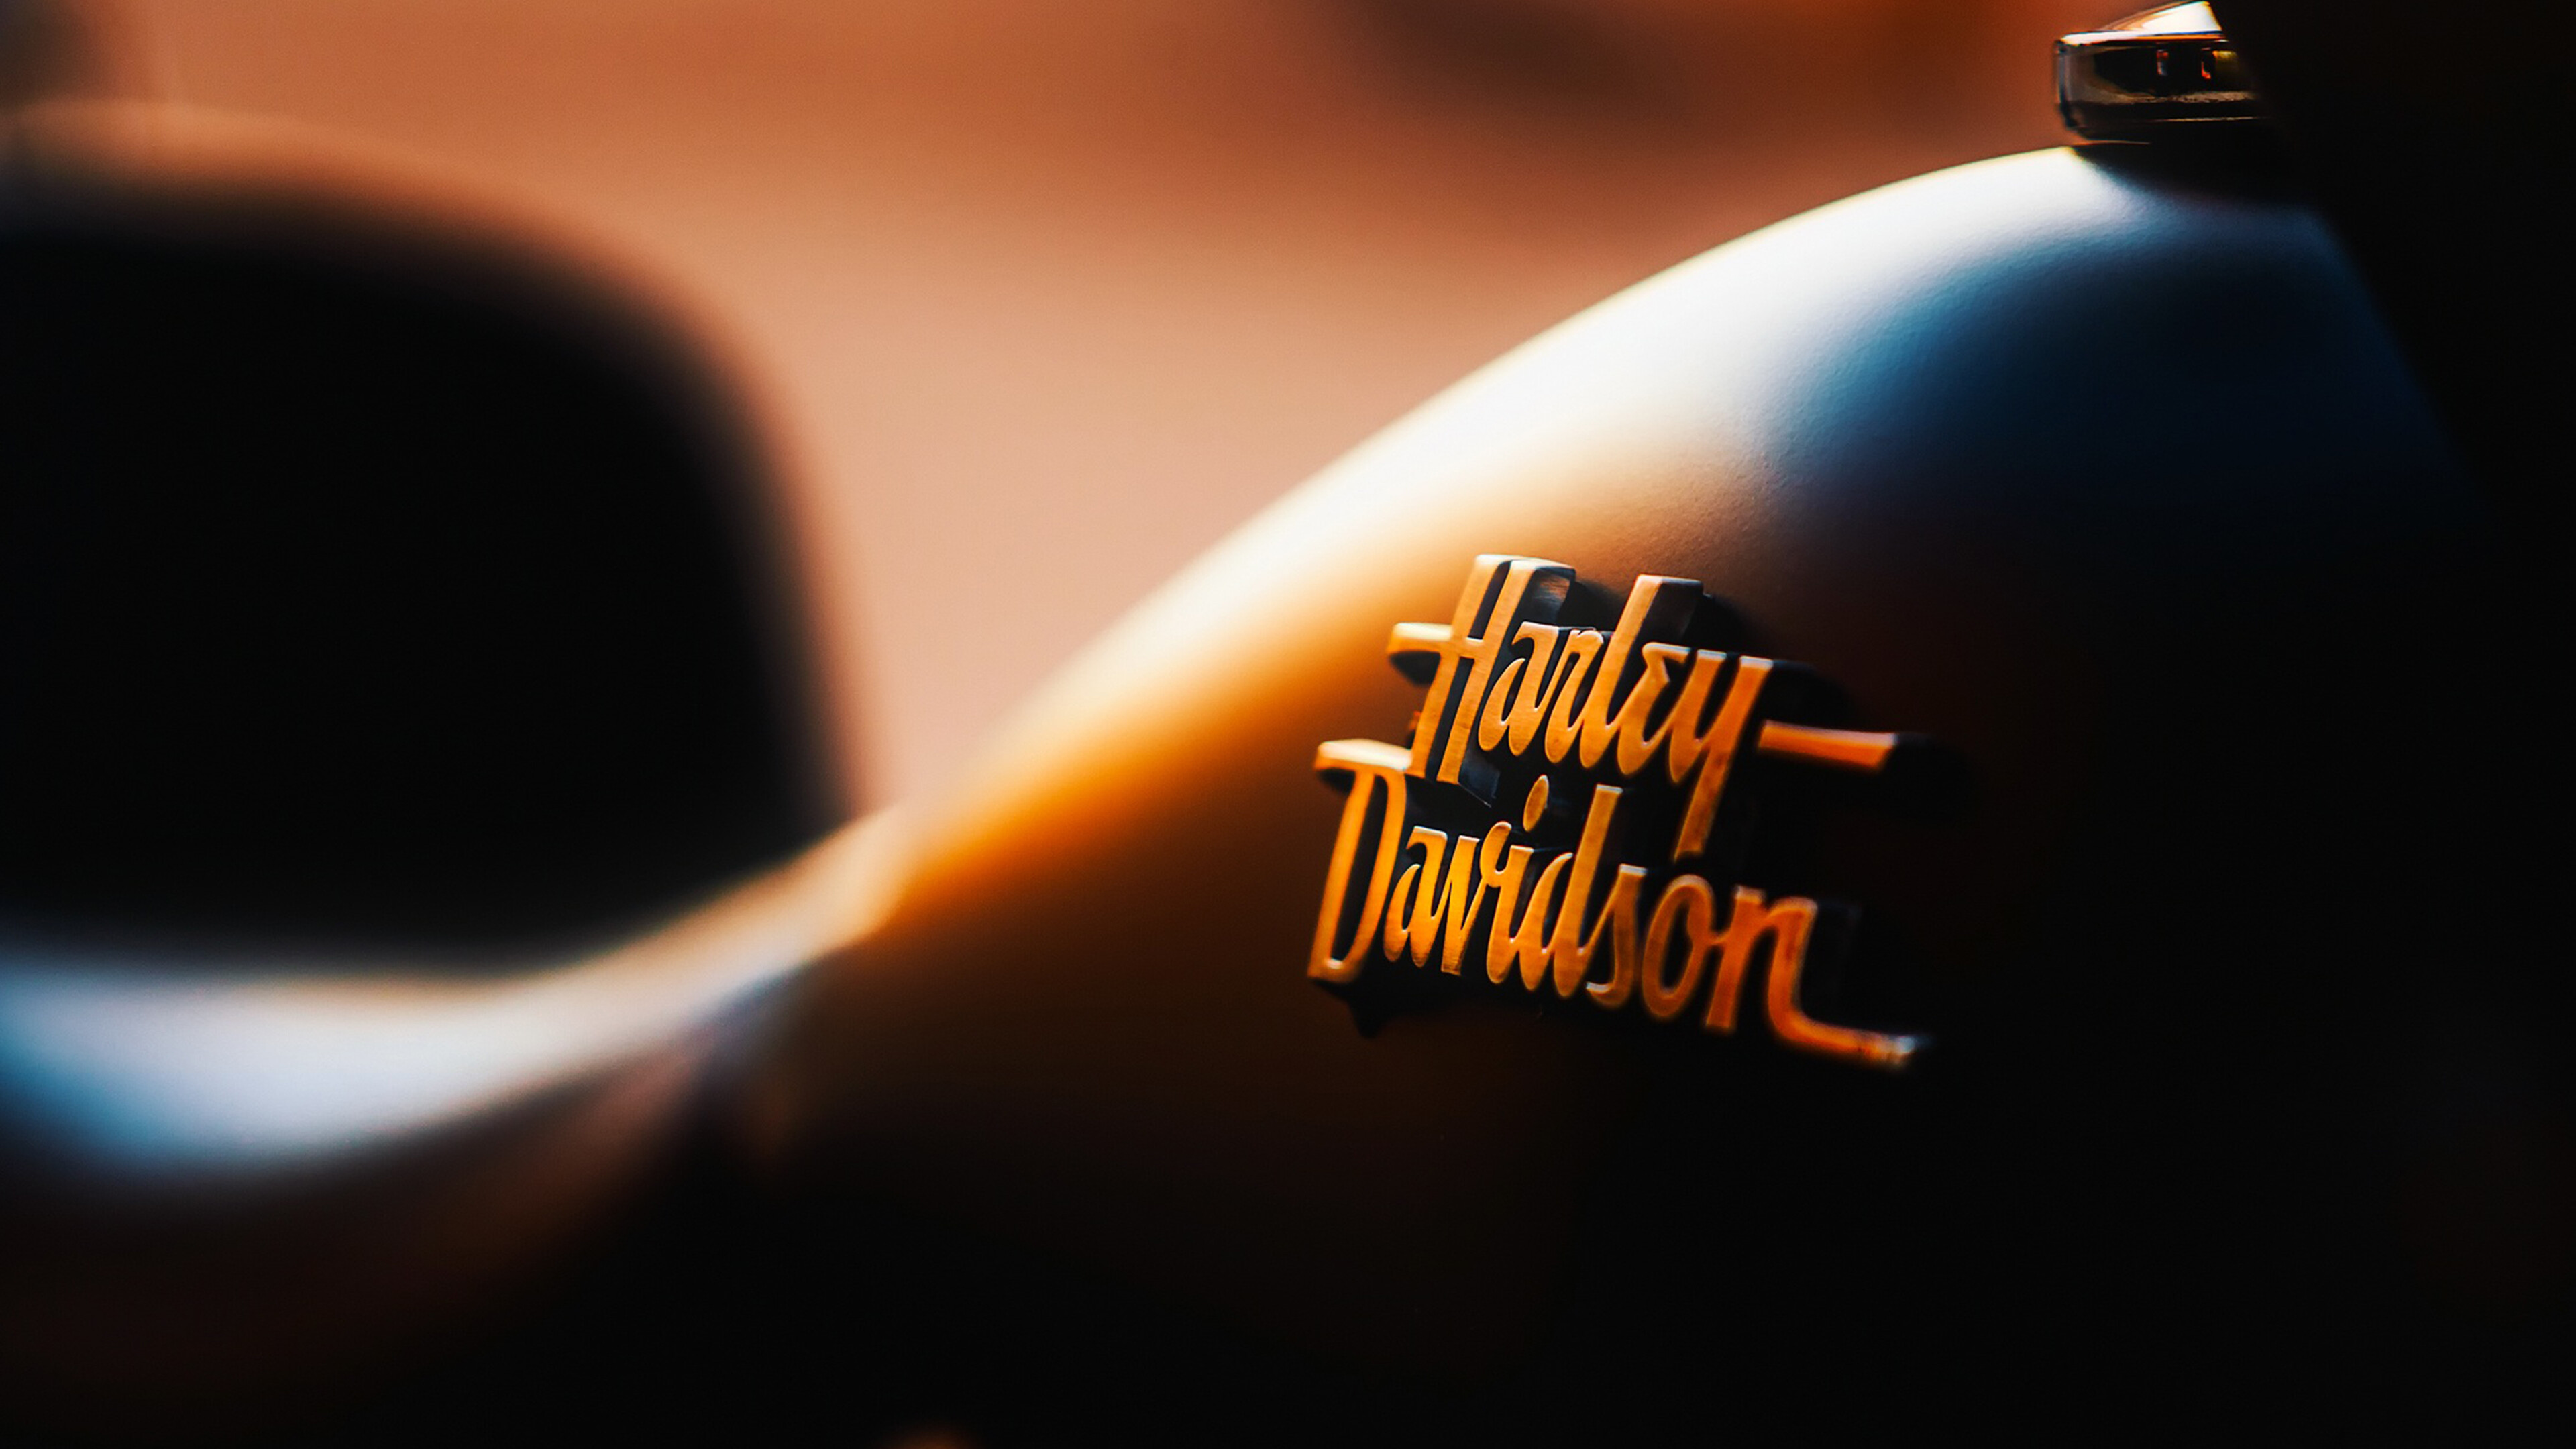 Harley-Davidson: The company manufactures its motorcycles at factories in York, Pennsylvania and Milwaukee, Wisconsin. 3840x2160 4K Wallpaper.